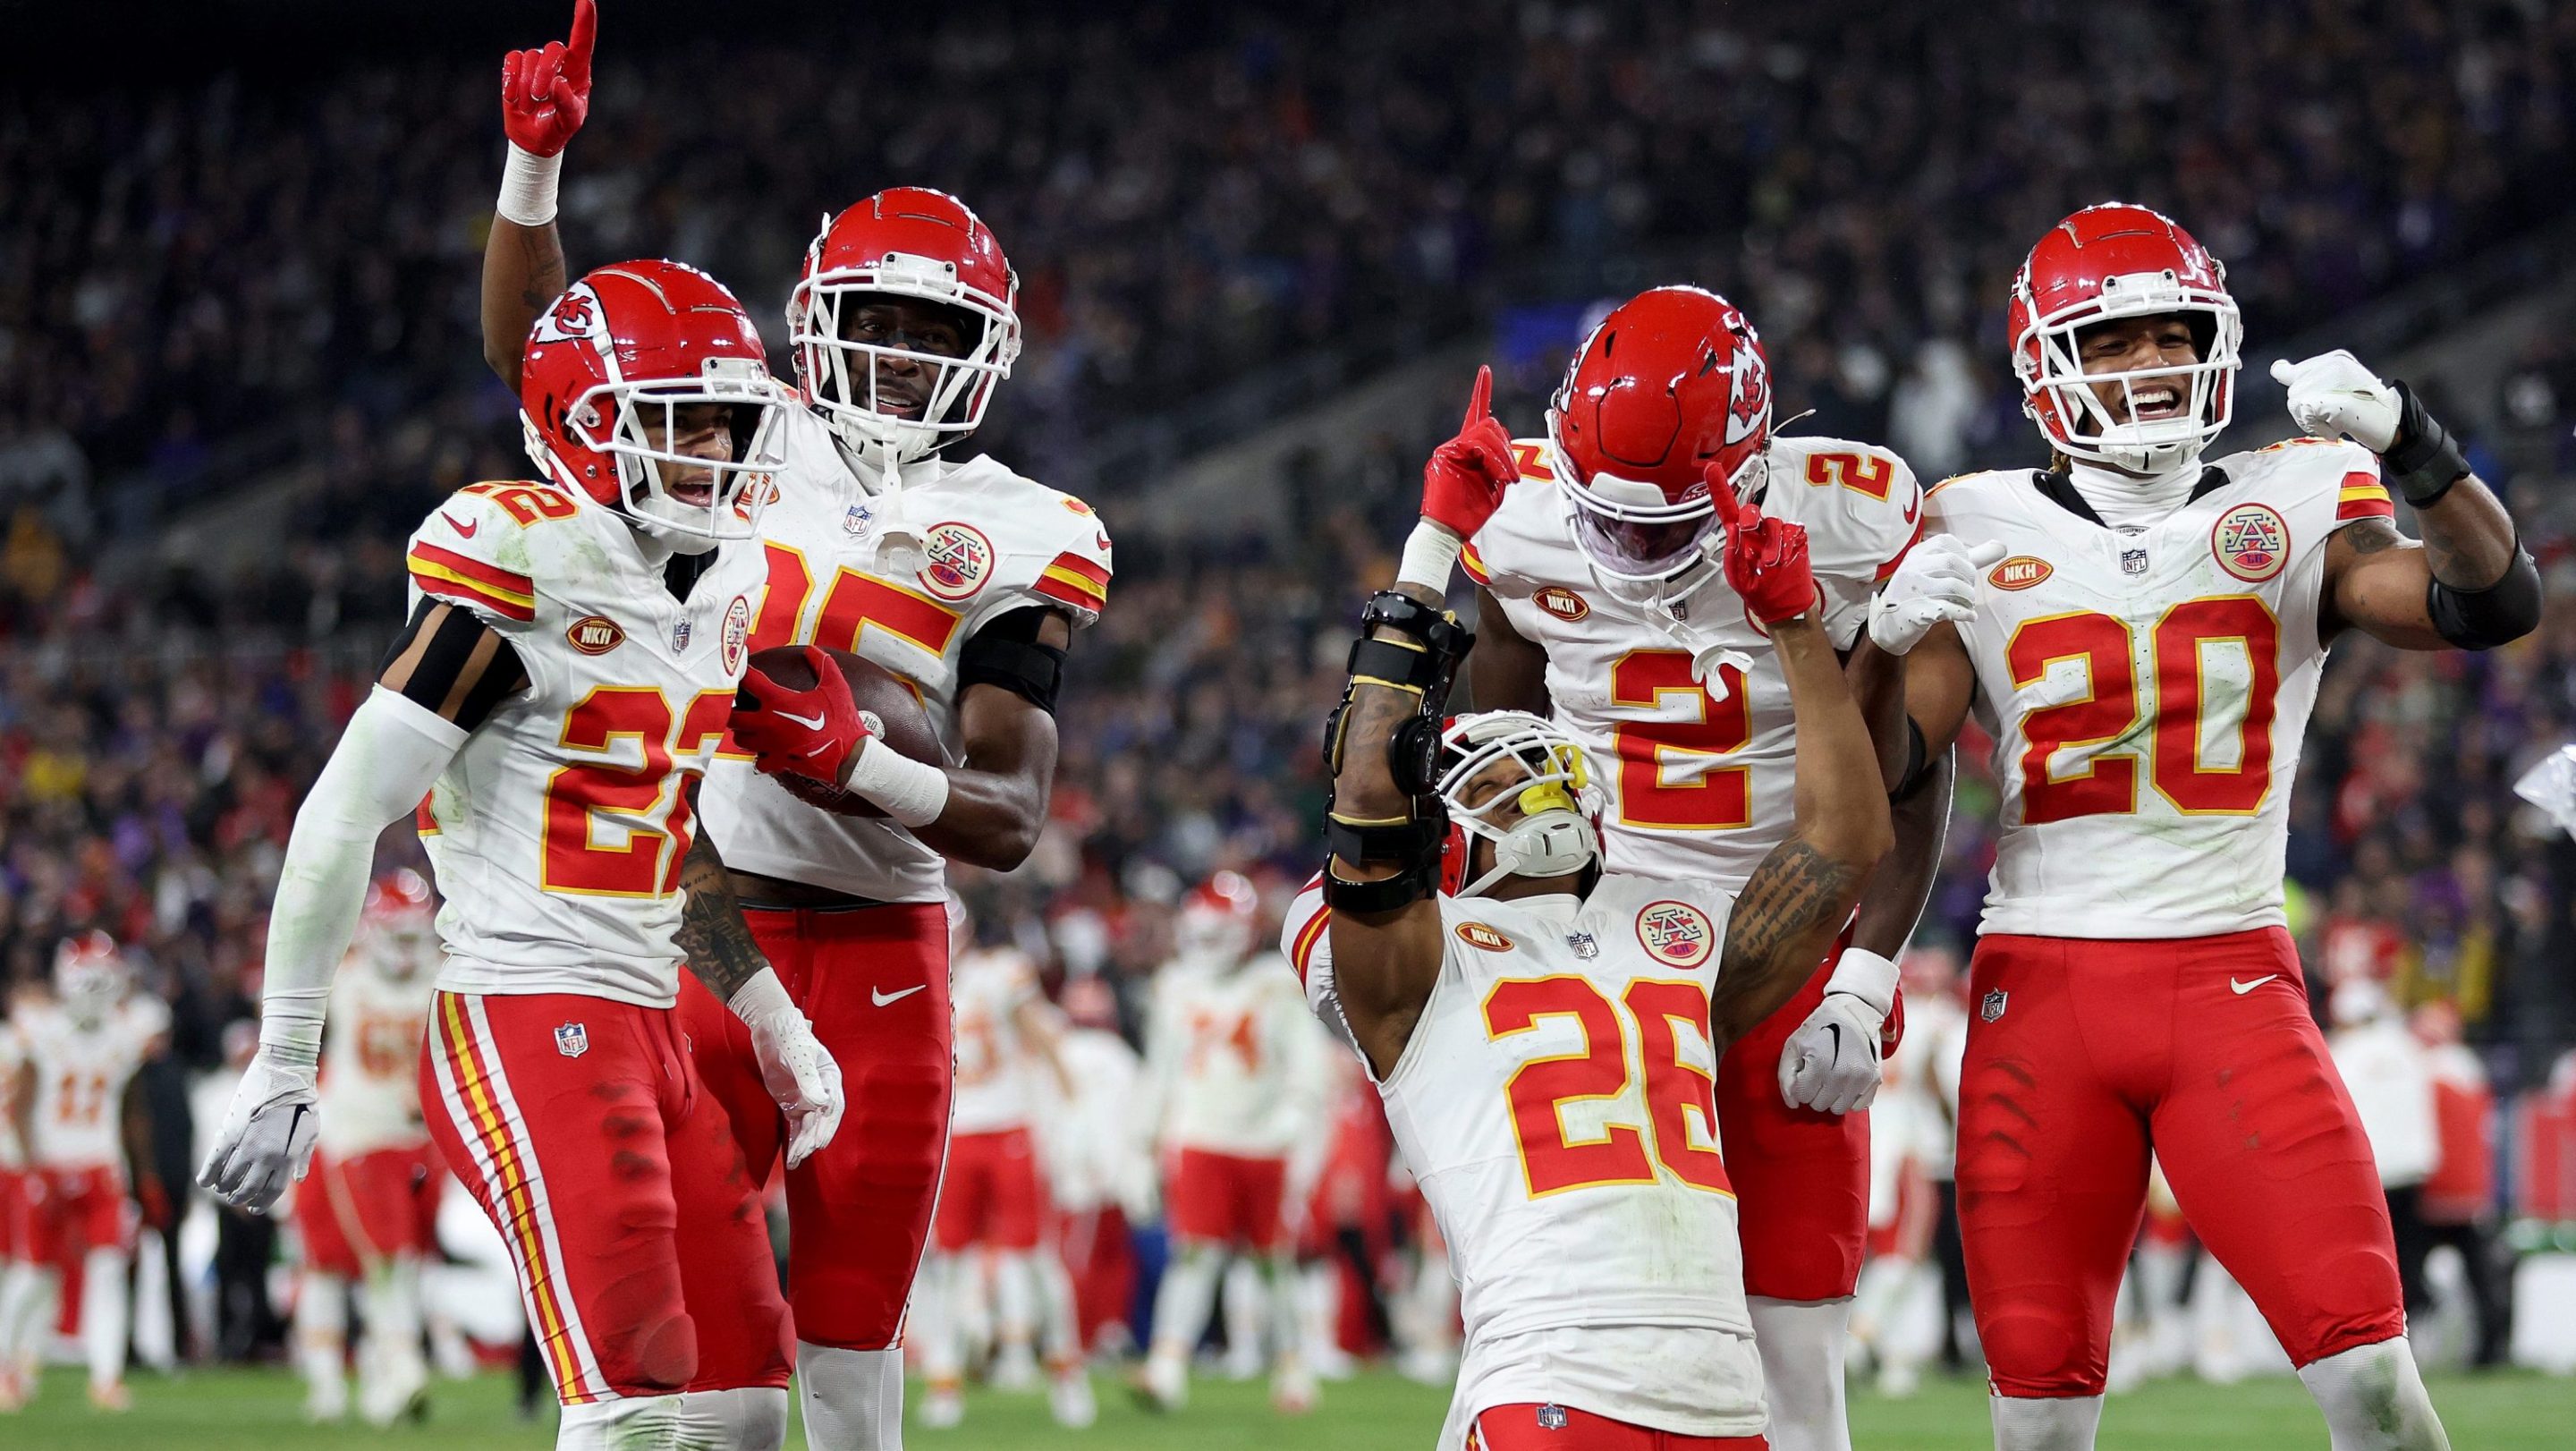 Deon Bush #26 of the Kansas City Chiefs celebrates with teammates after an interception against the Baltimore Ravens during the fourth quarter in the AFC Championship Game .